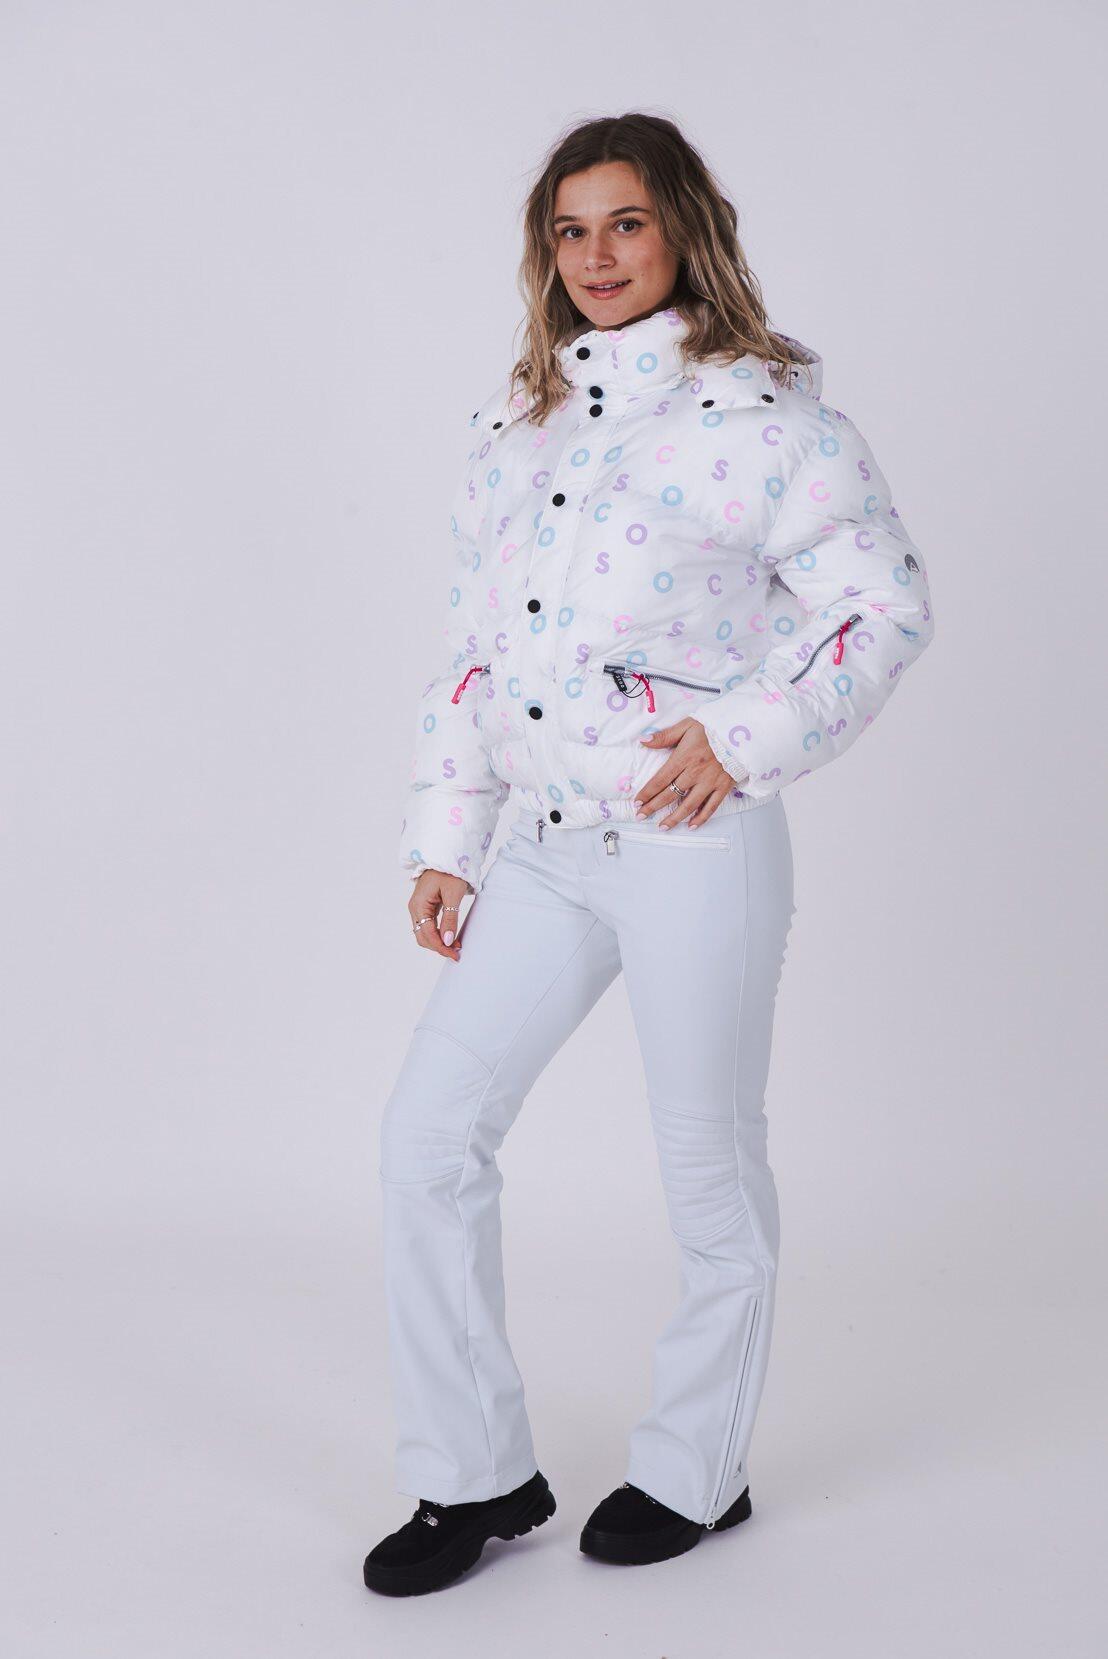 White OOSC Print Chic Puffer Jacket 2/5